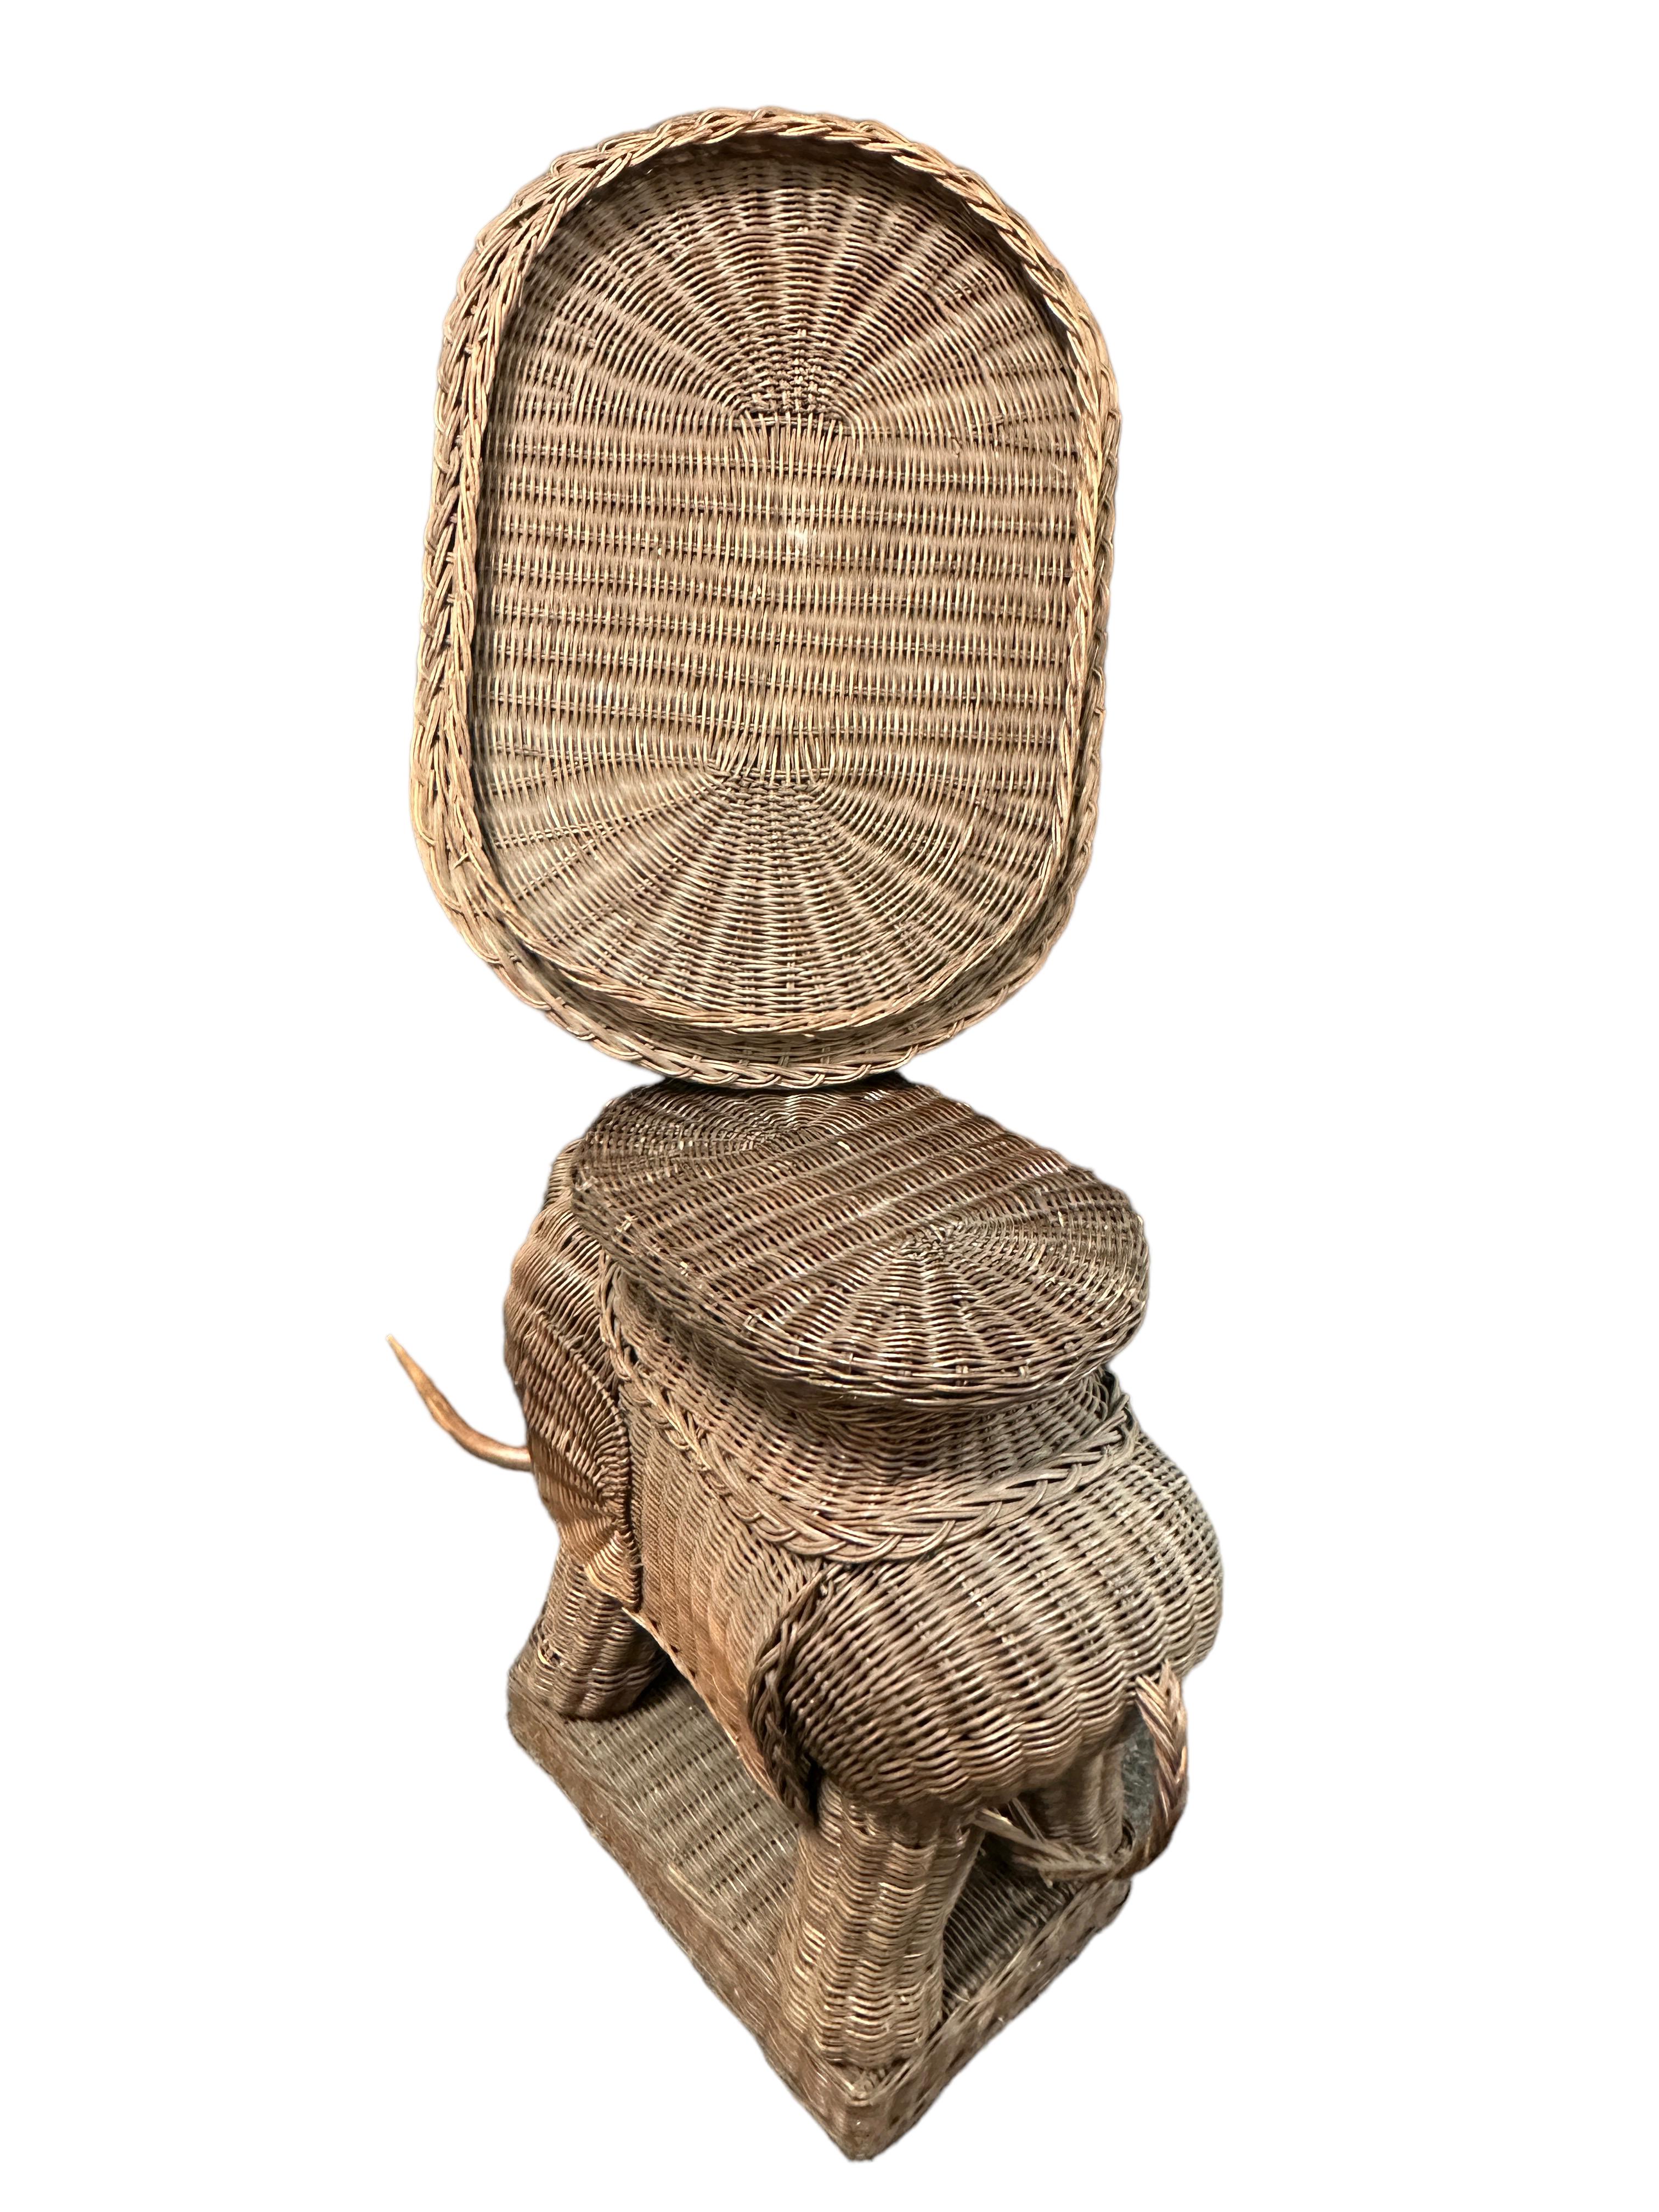 Mid-20th Century Stunning Rattan Wicker Elephant Side Table with Tray, France, 1960s For Sale